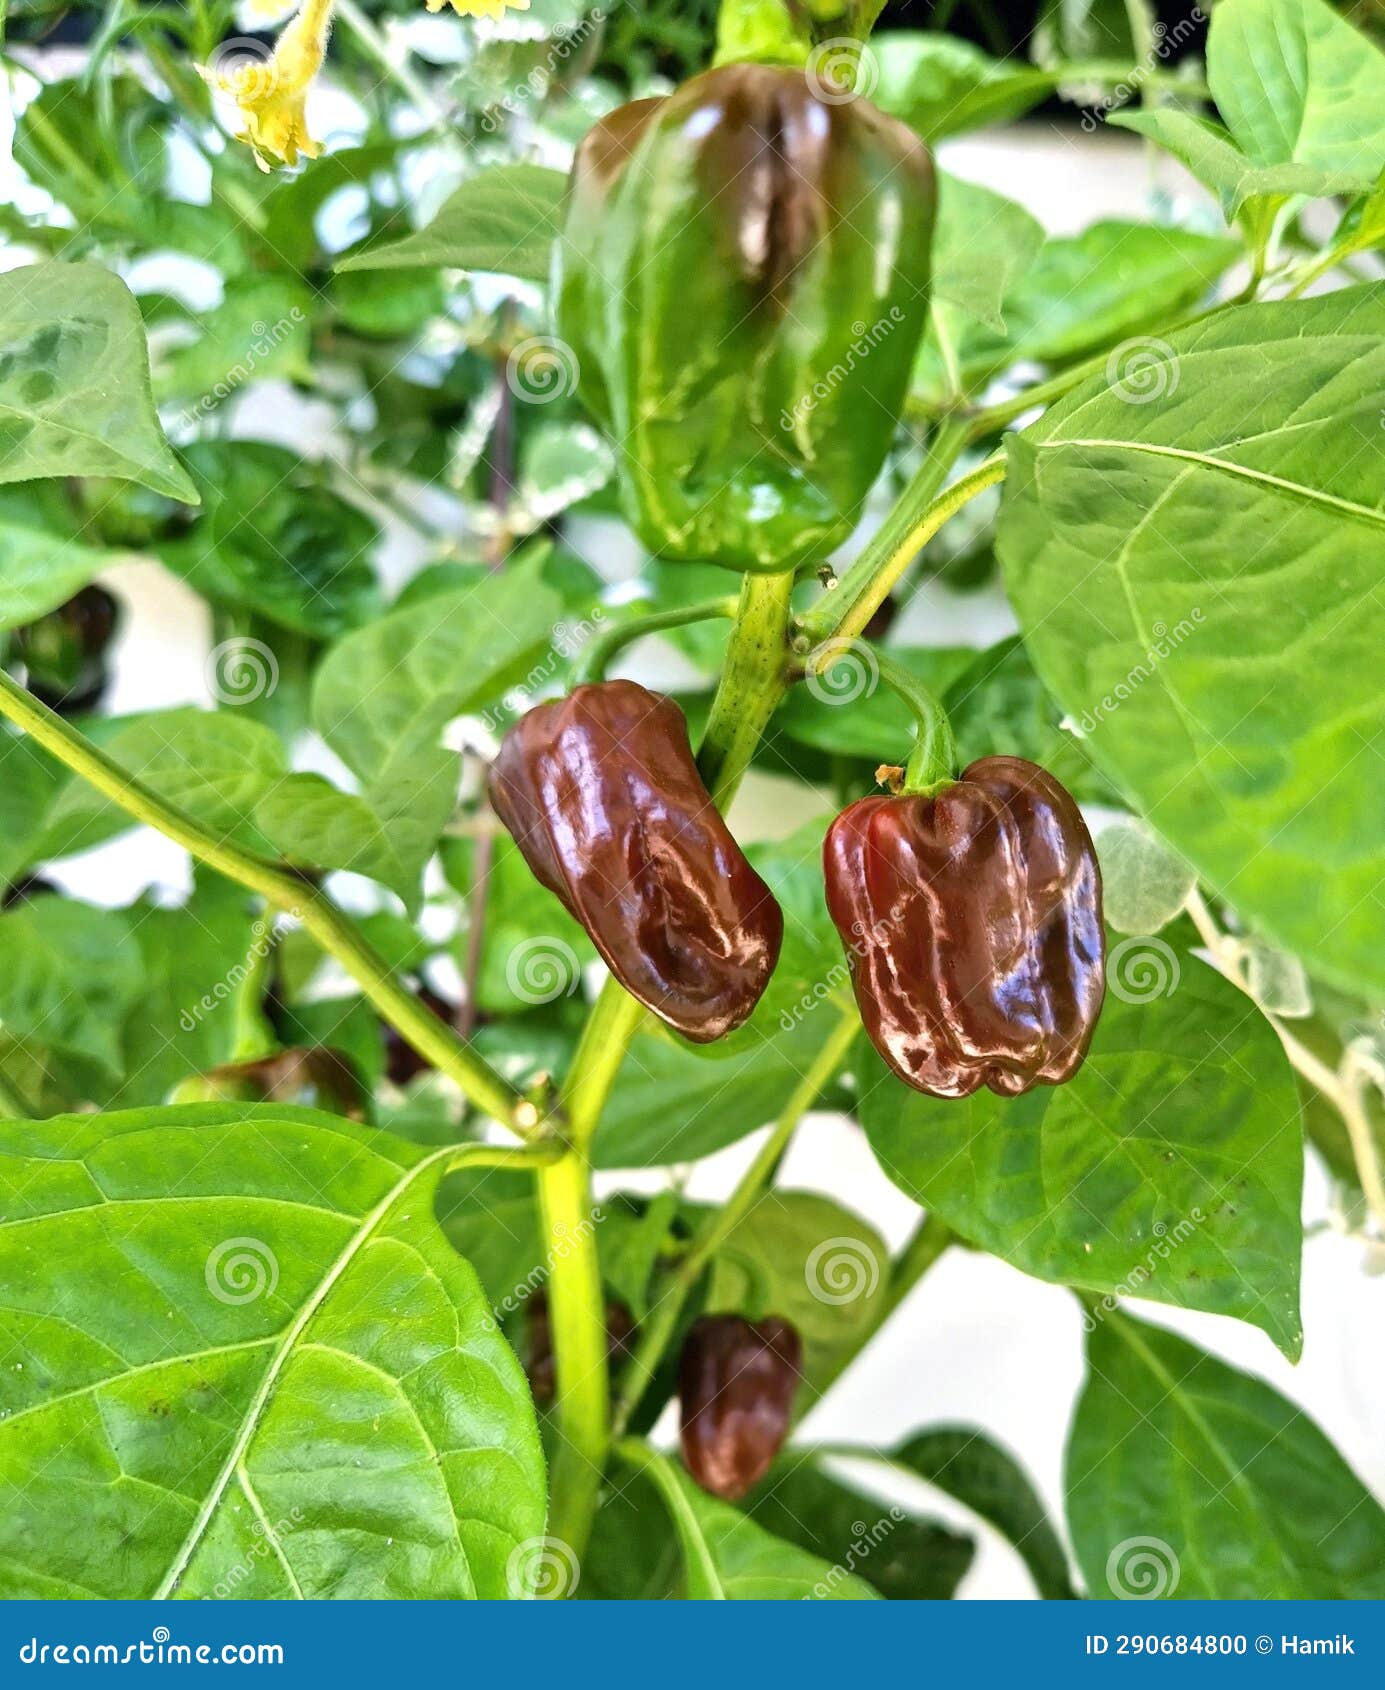 a plant with chocolate habanero peppers (capsicum chinense